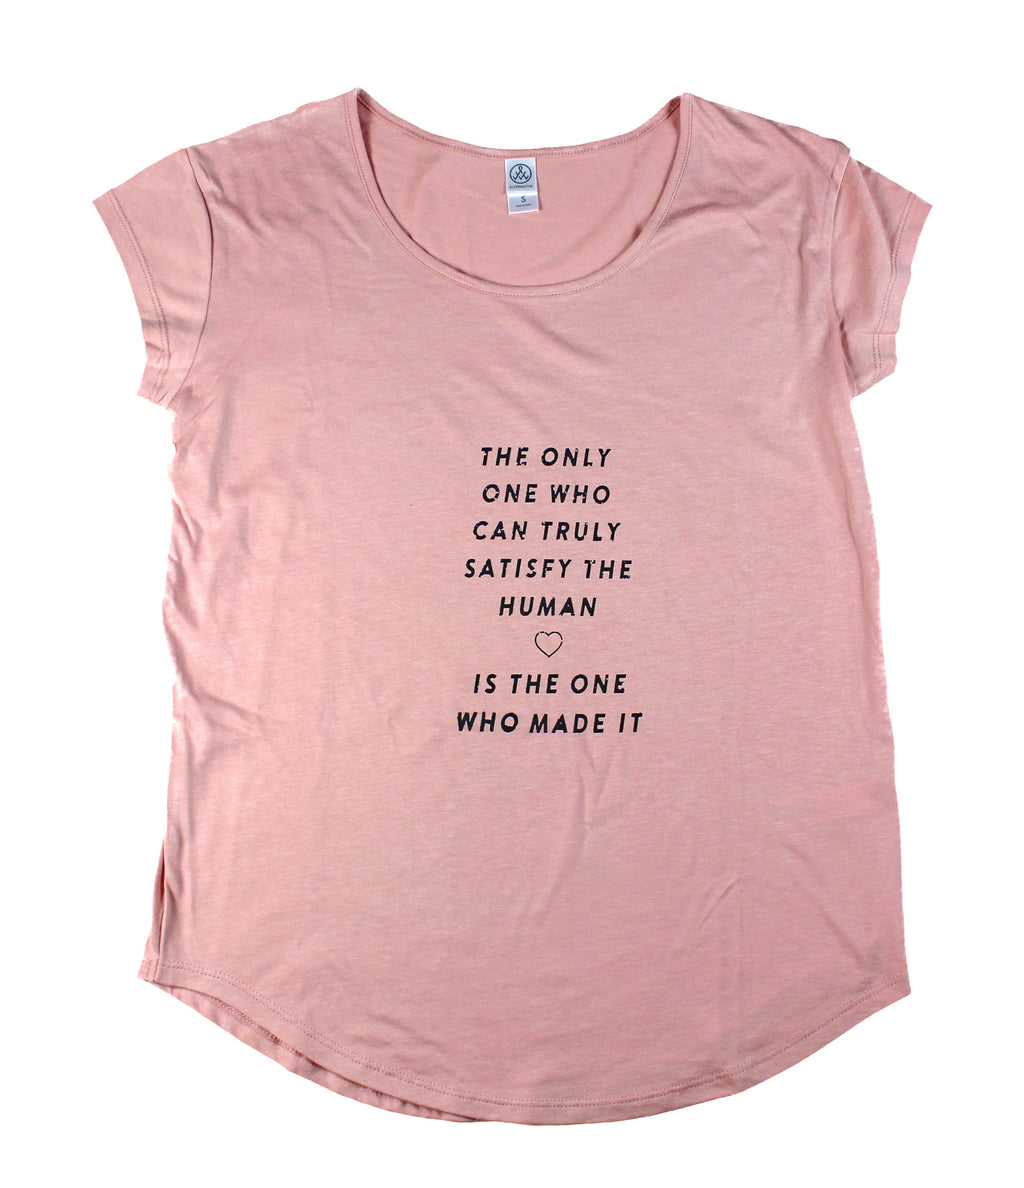 TRULY SATISFY BLUSH WOMEN'S SWOOP NECK T-SHIRT